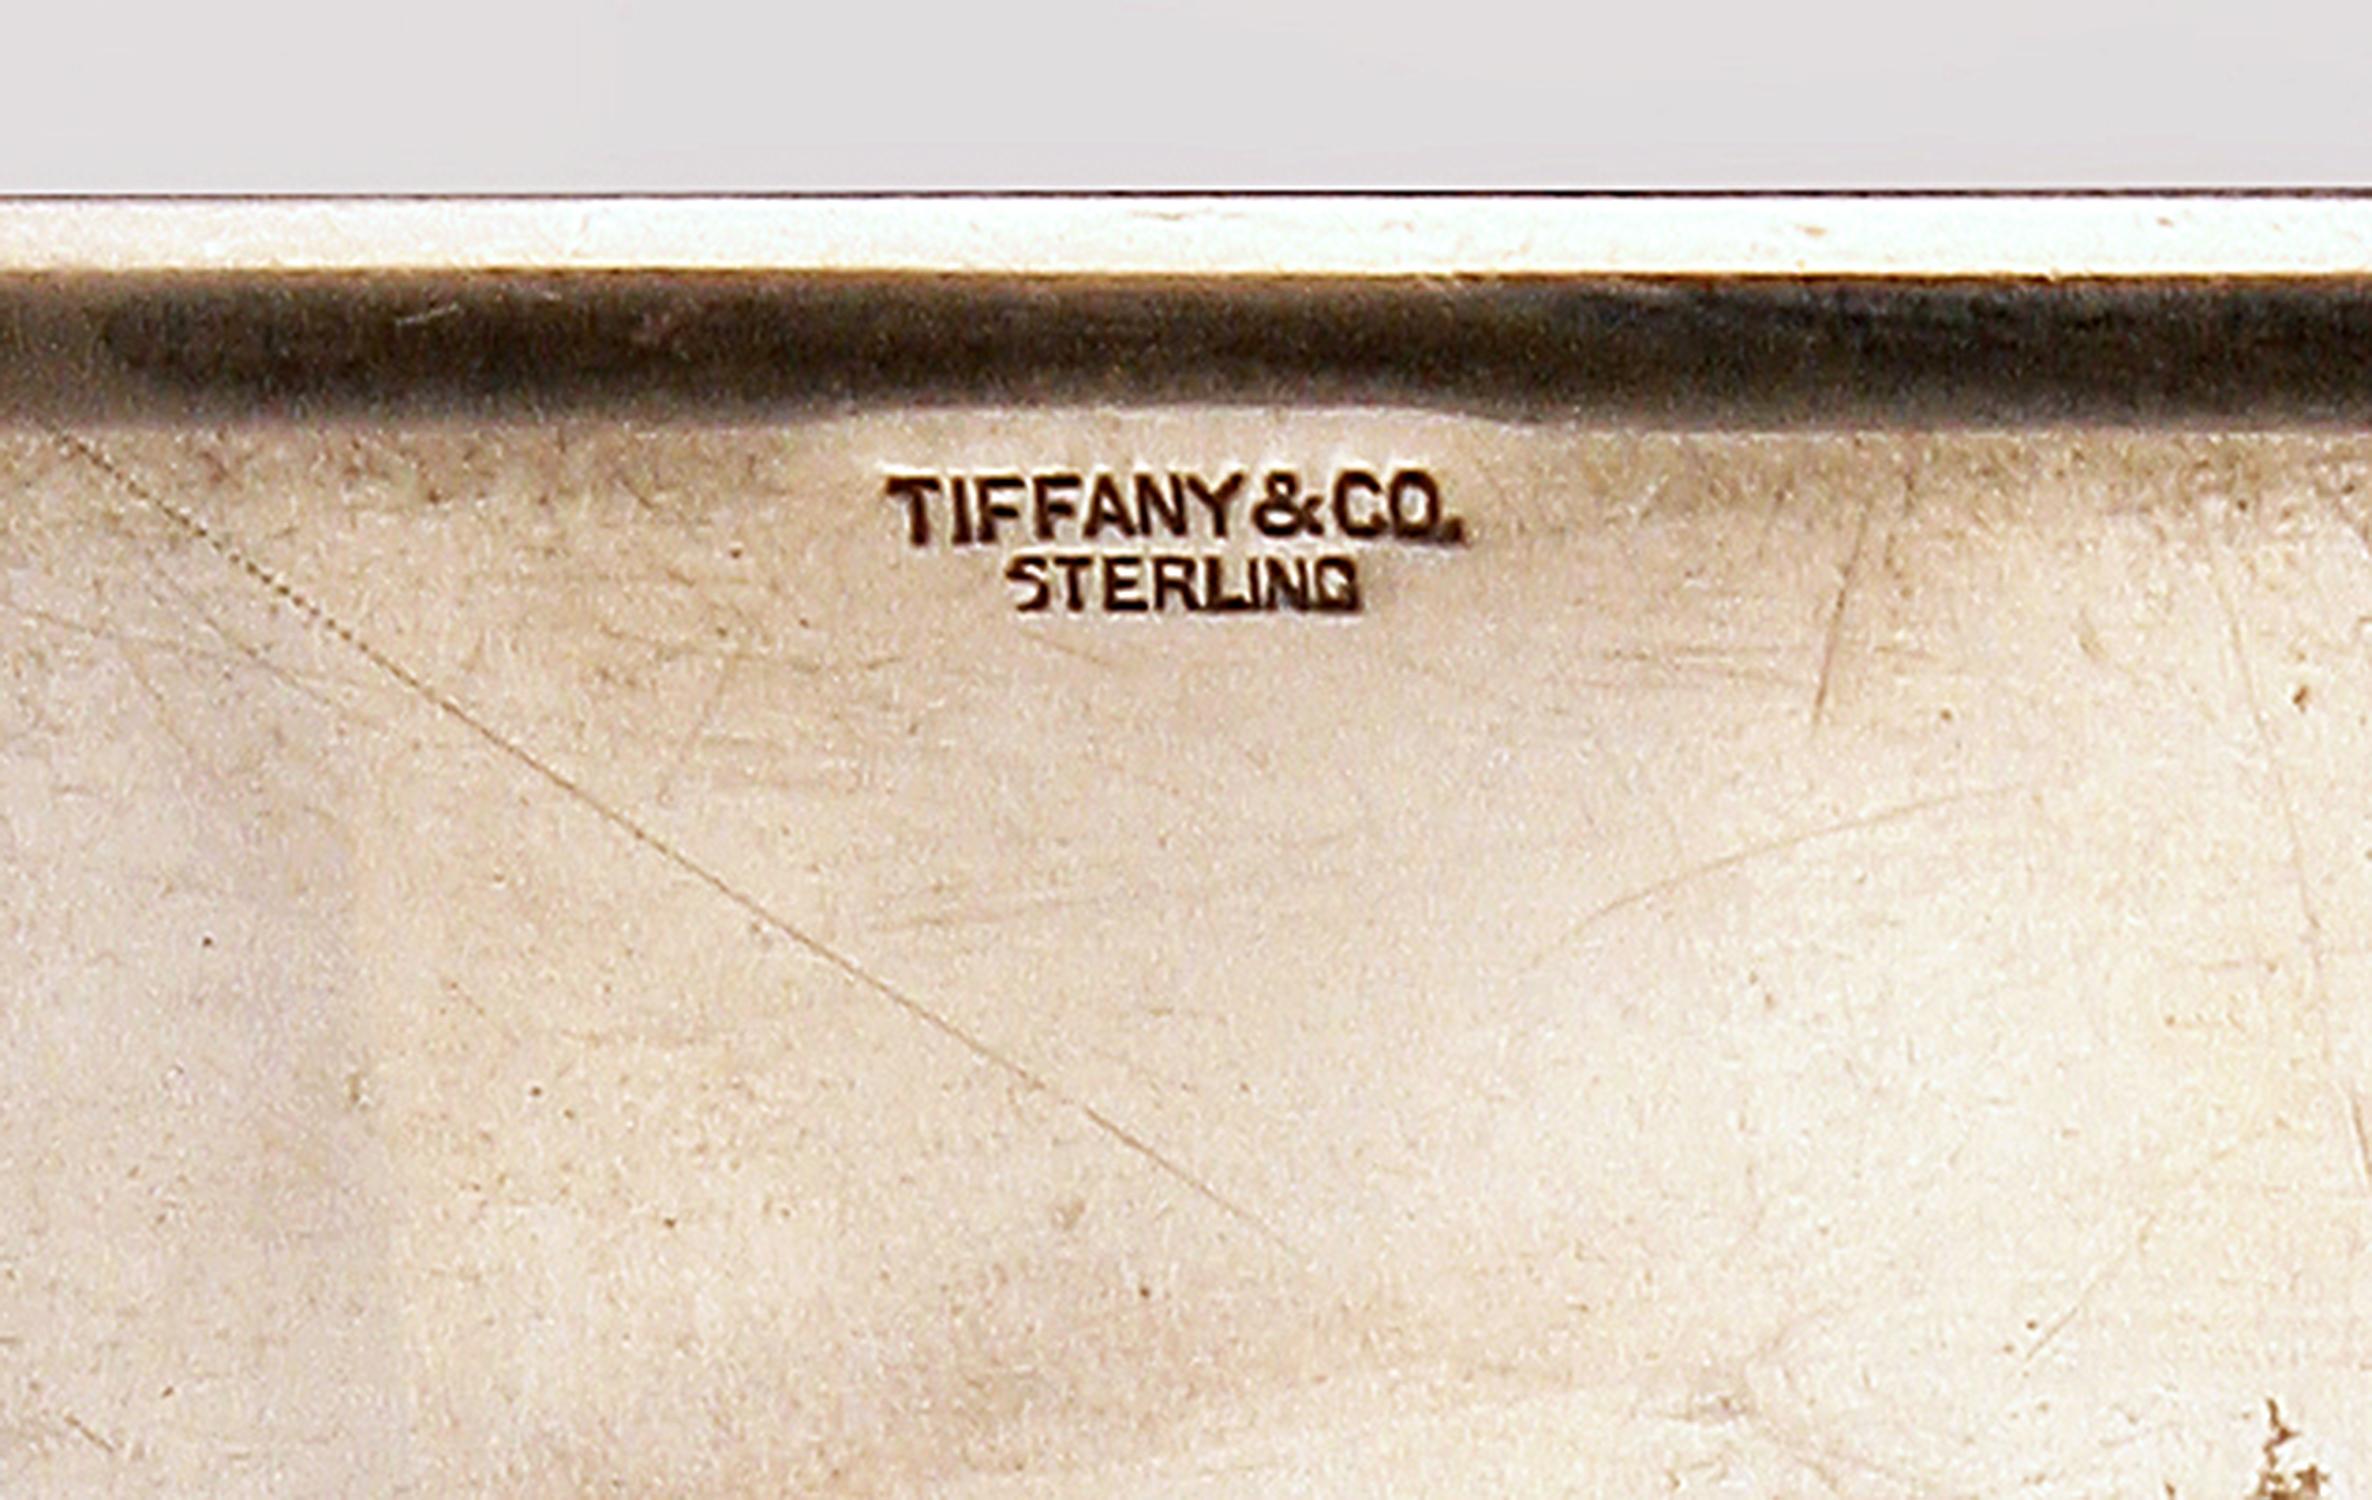 Metalwork Mid-20th Century Sterling Silver Matchbook Cover/Match Holder by Tiffany & Co. For Sale